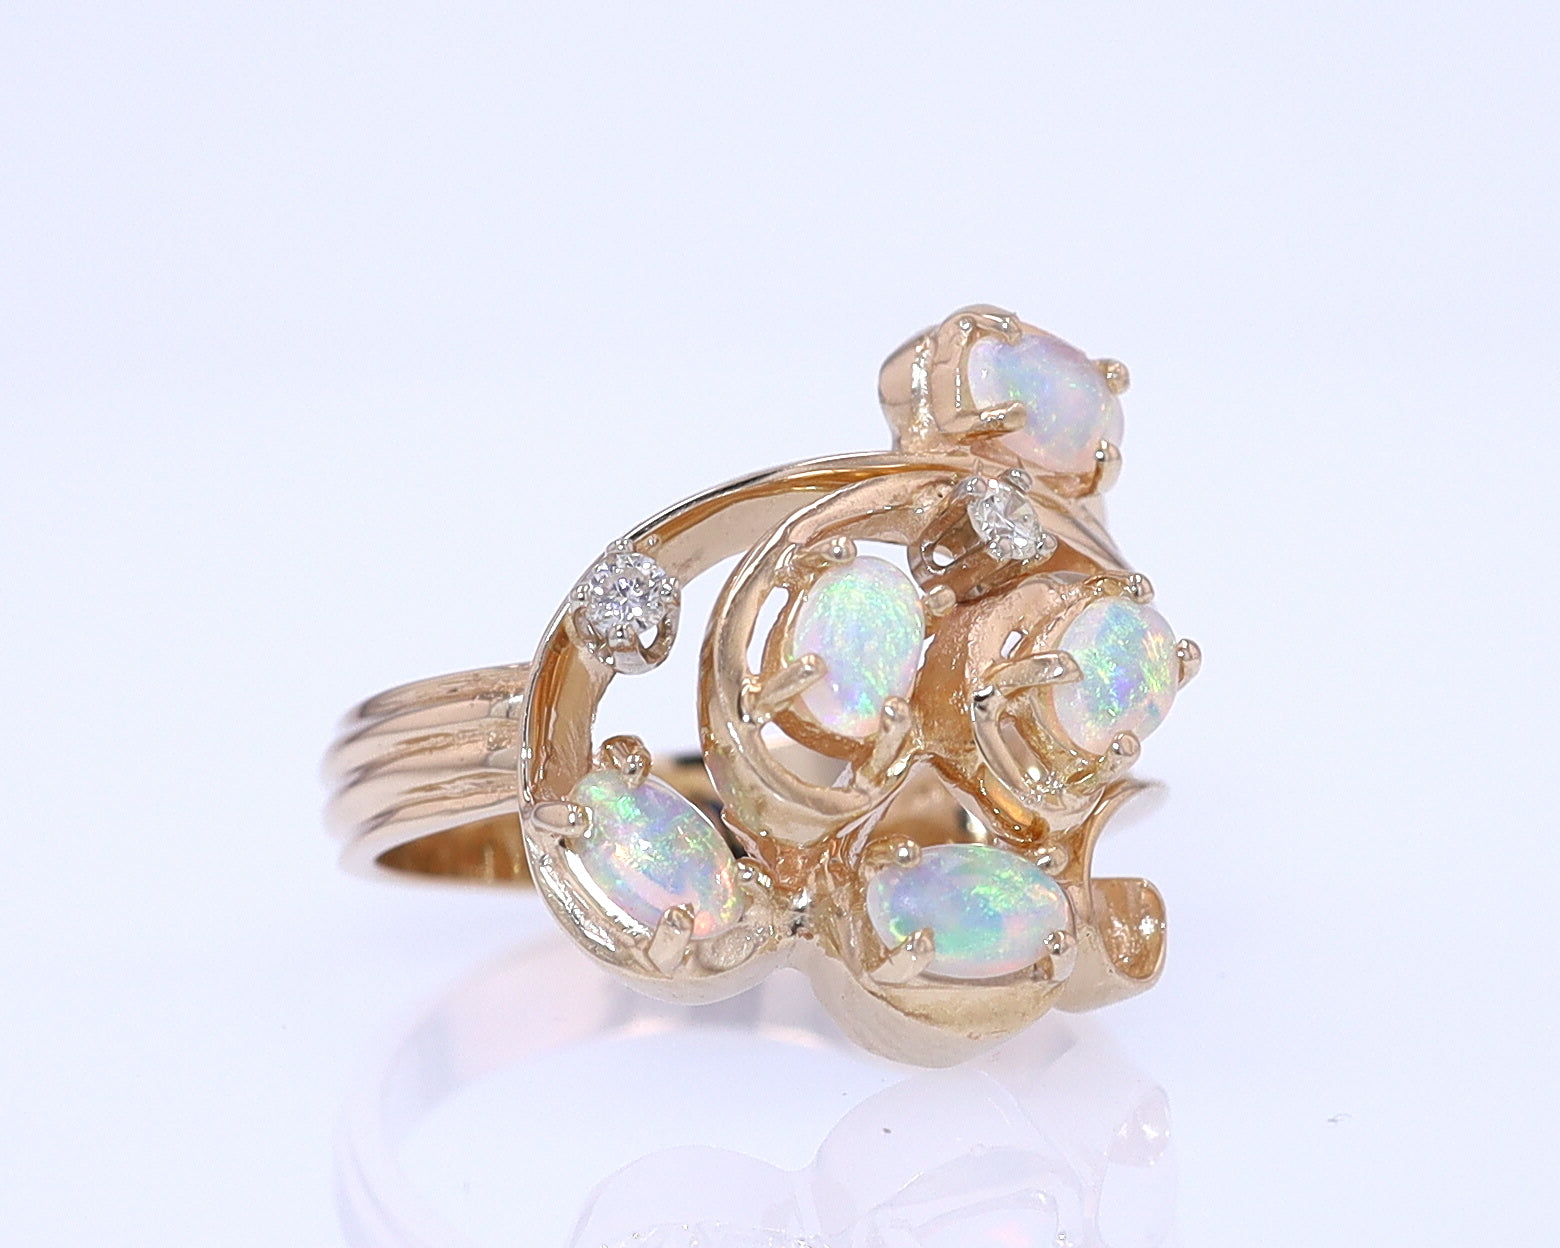 Vintage Swirling Opal & Diamond Cocktail Ring